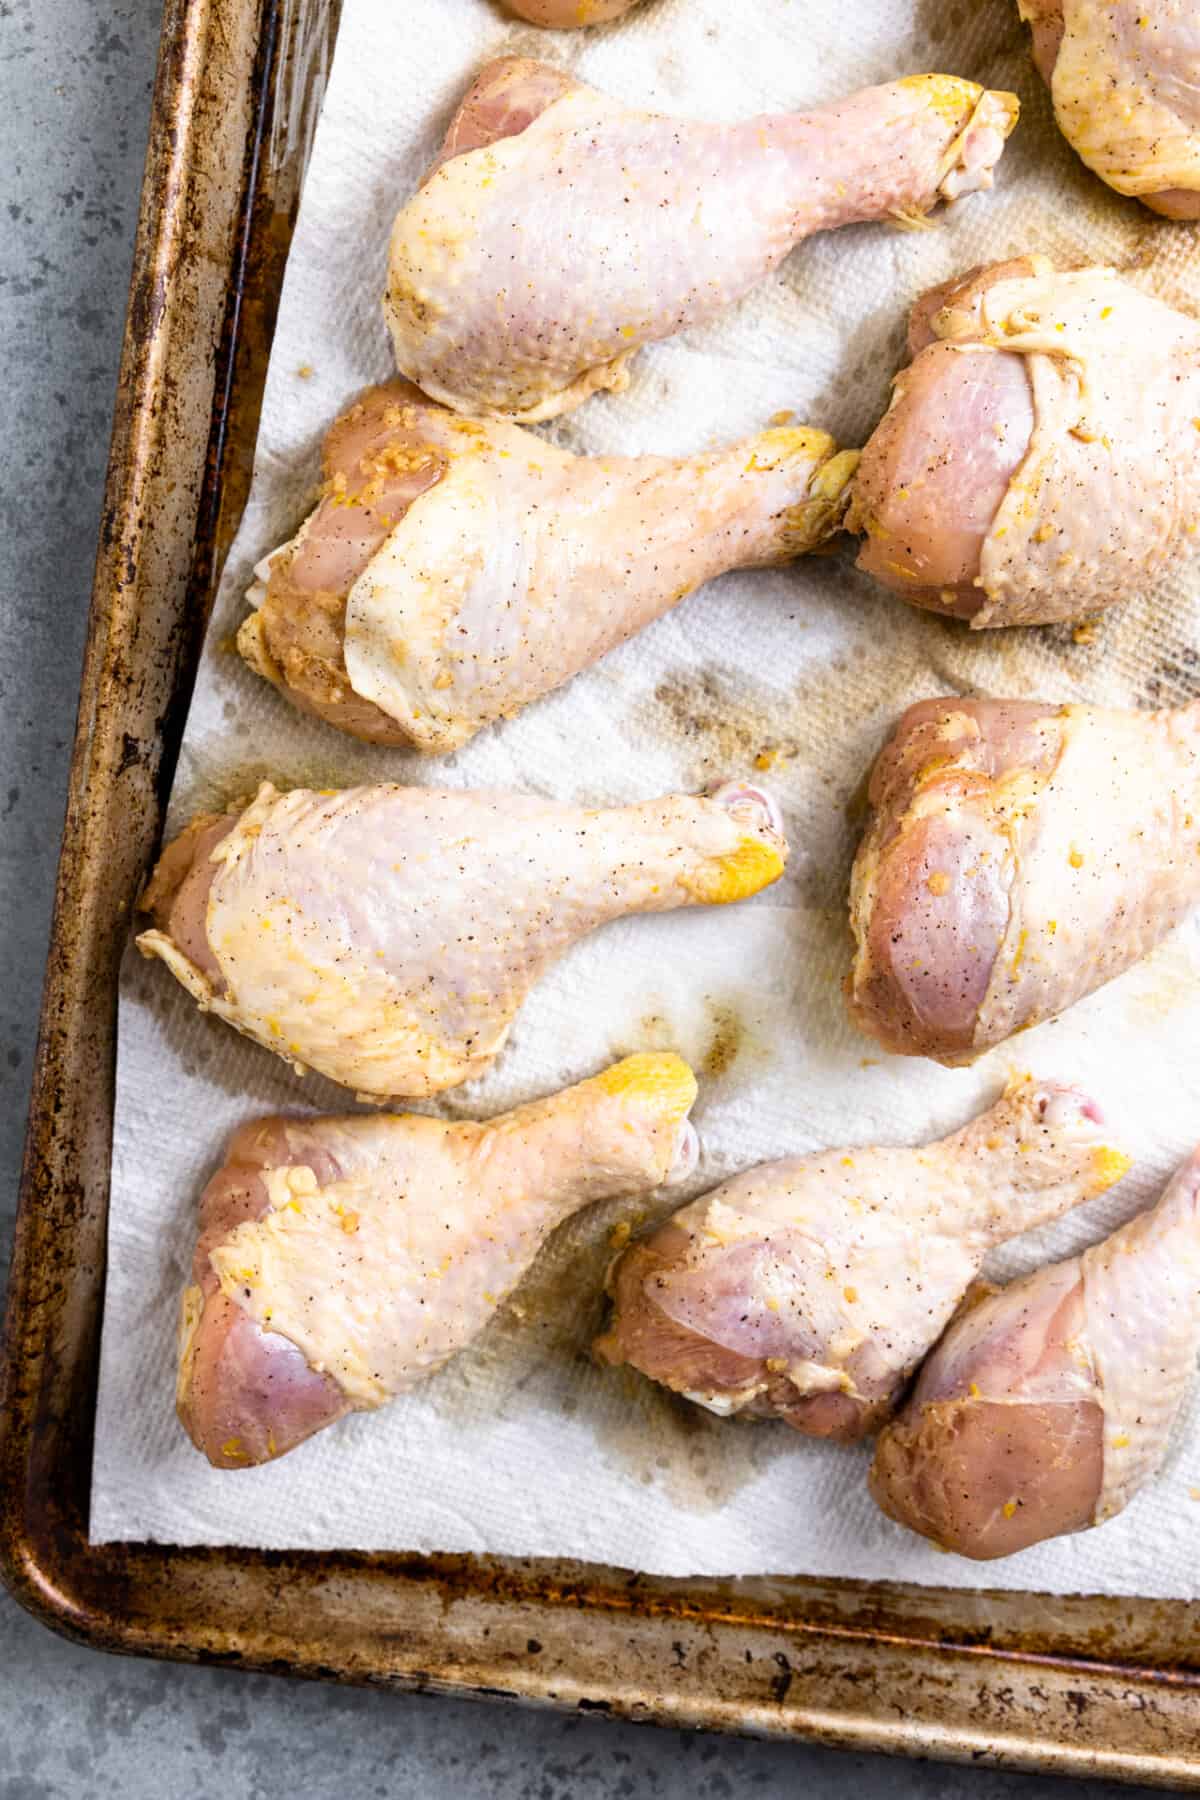 Raw chicken drumsticks on a large baking sheet lined with parchment paper.